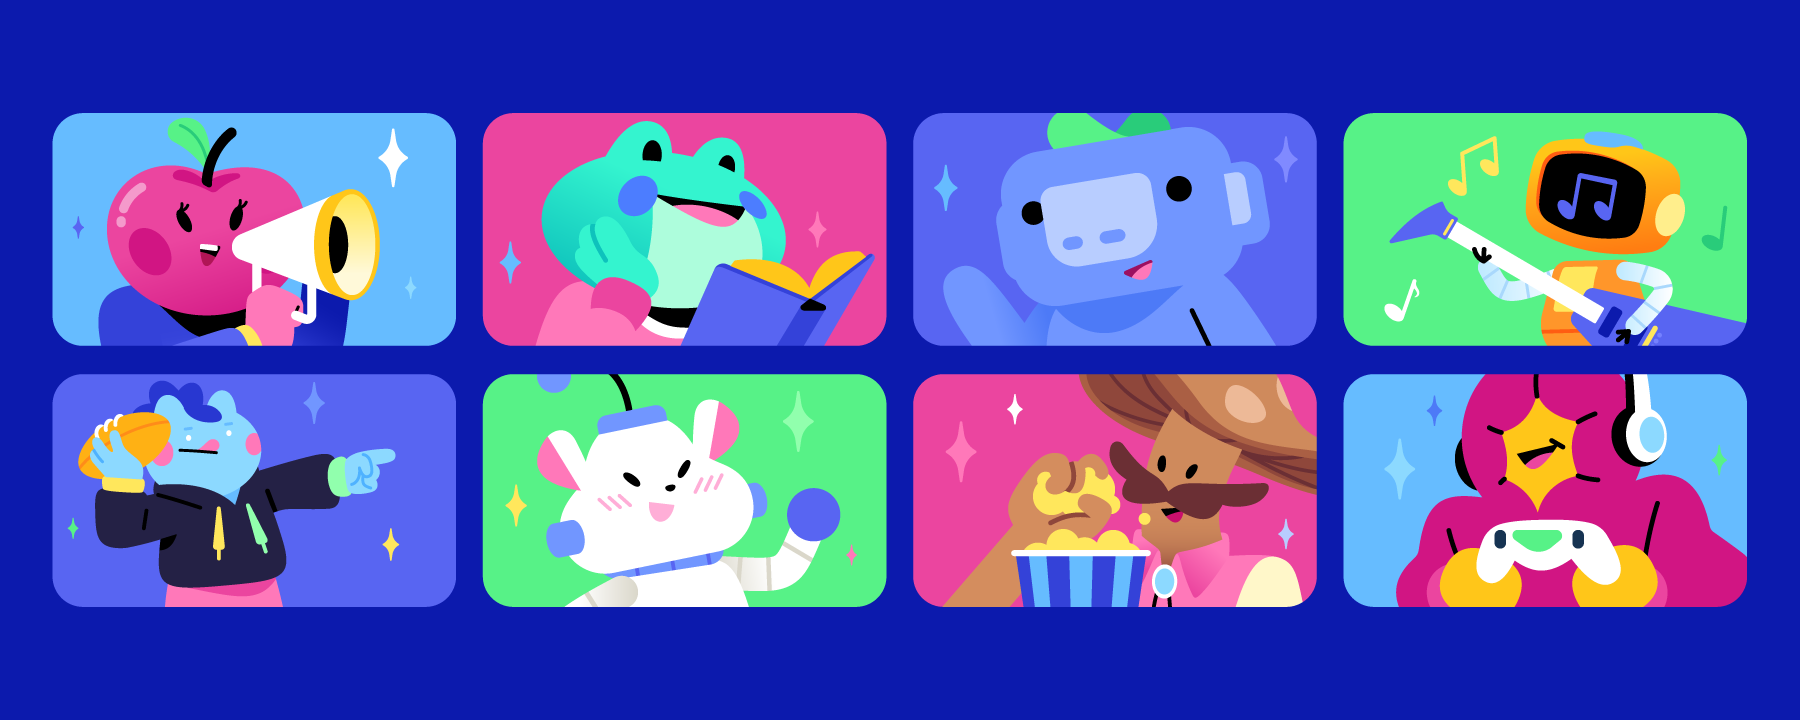 Eight friends, represented by Discord characters, enjoying a group video call on Discord together. Some are playing games and reading books together, while others are watching movies and playing musical instruments. Everyone is having fun, smiling while talking away!